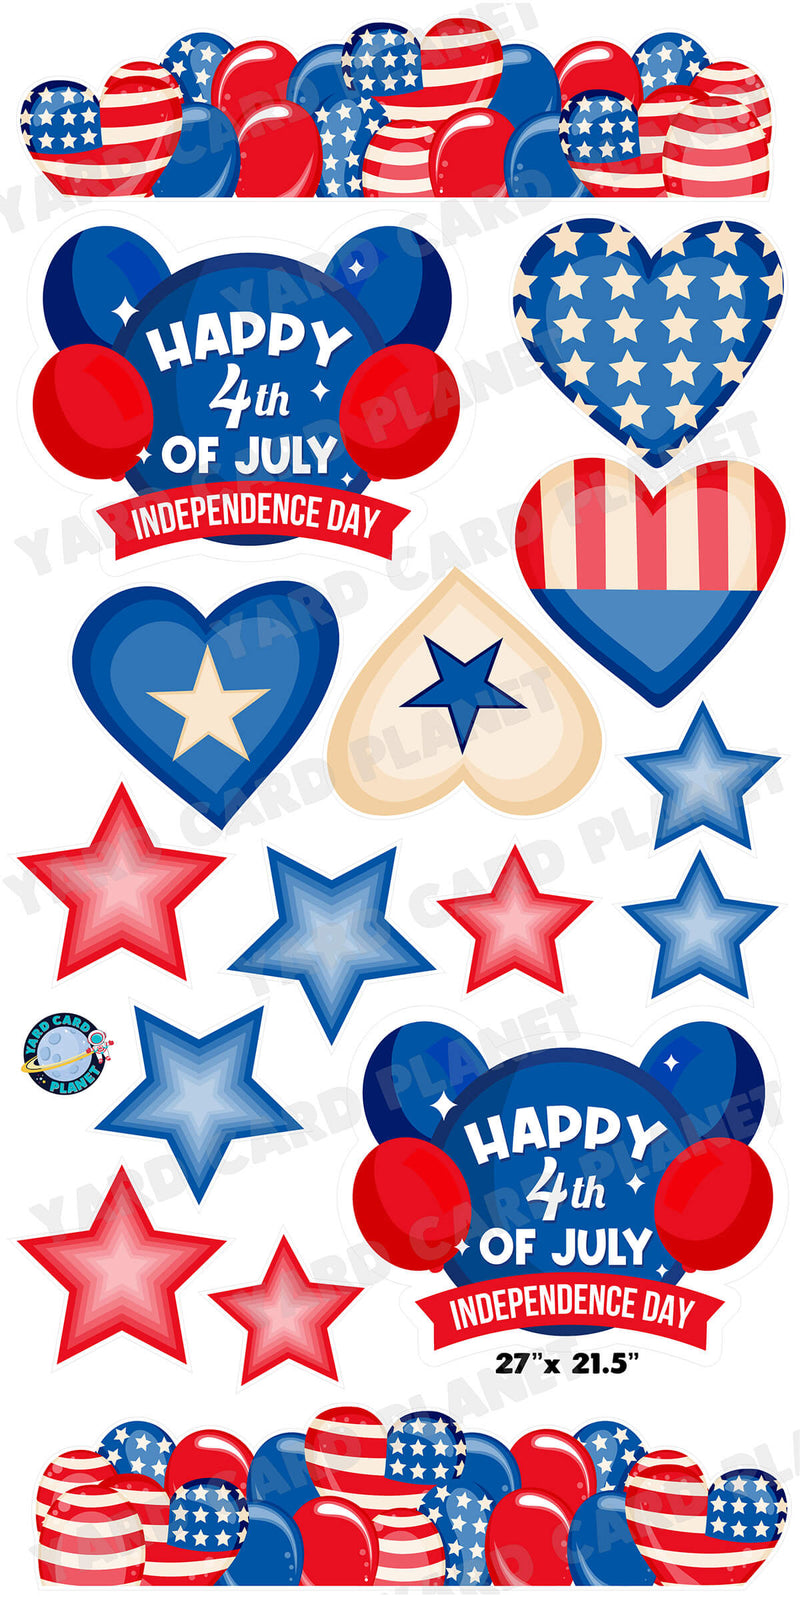 4th of July Independence Day Signs, EZ Filler Balloons, Stars and Hearts Yard Card Flair Set